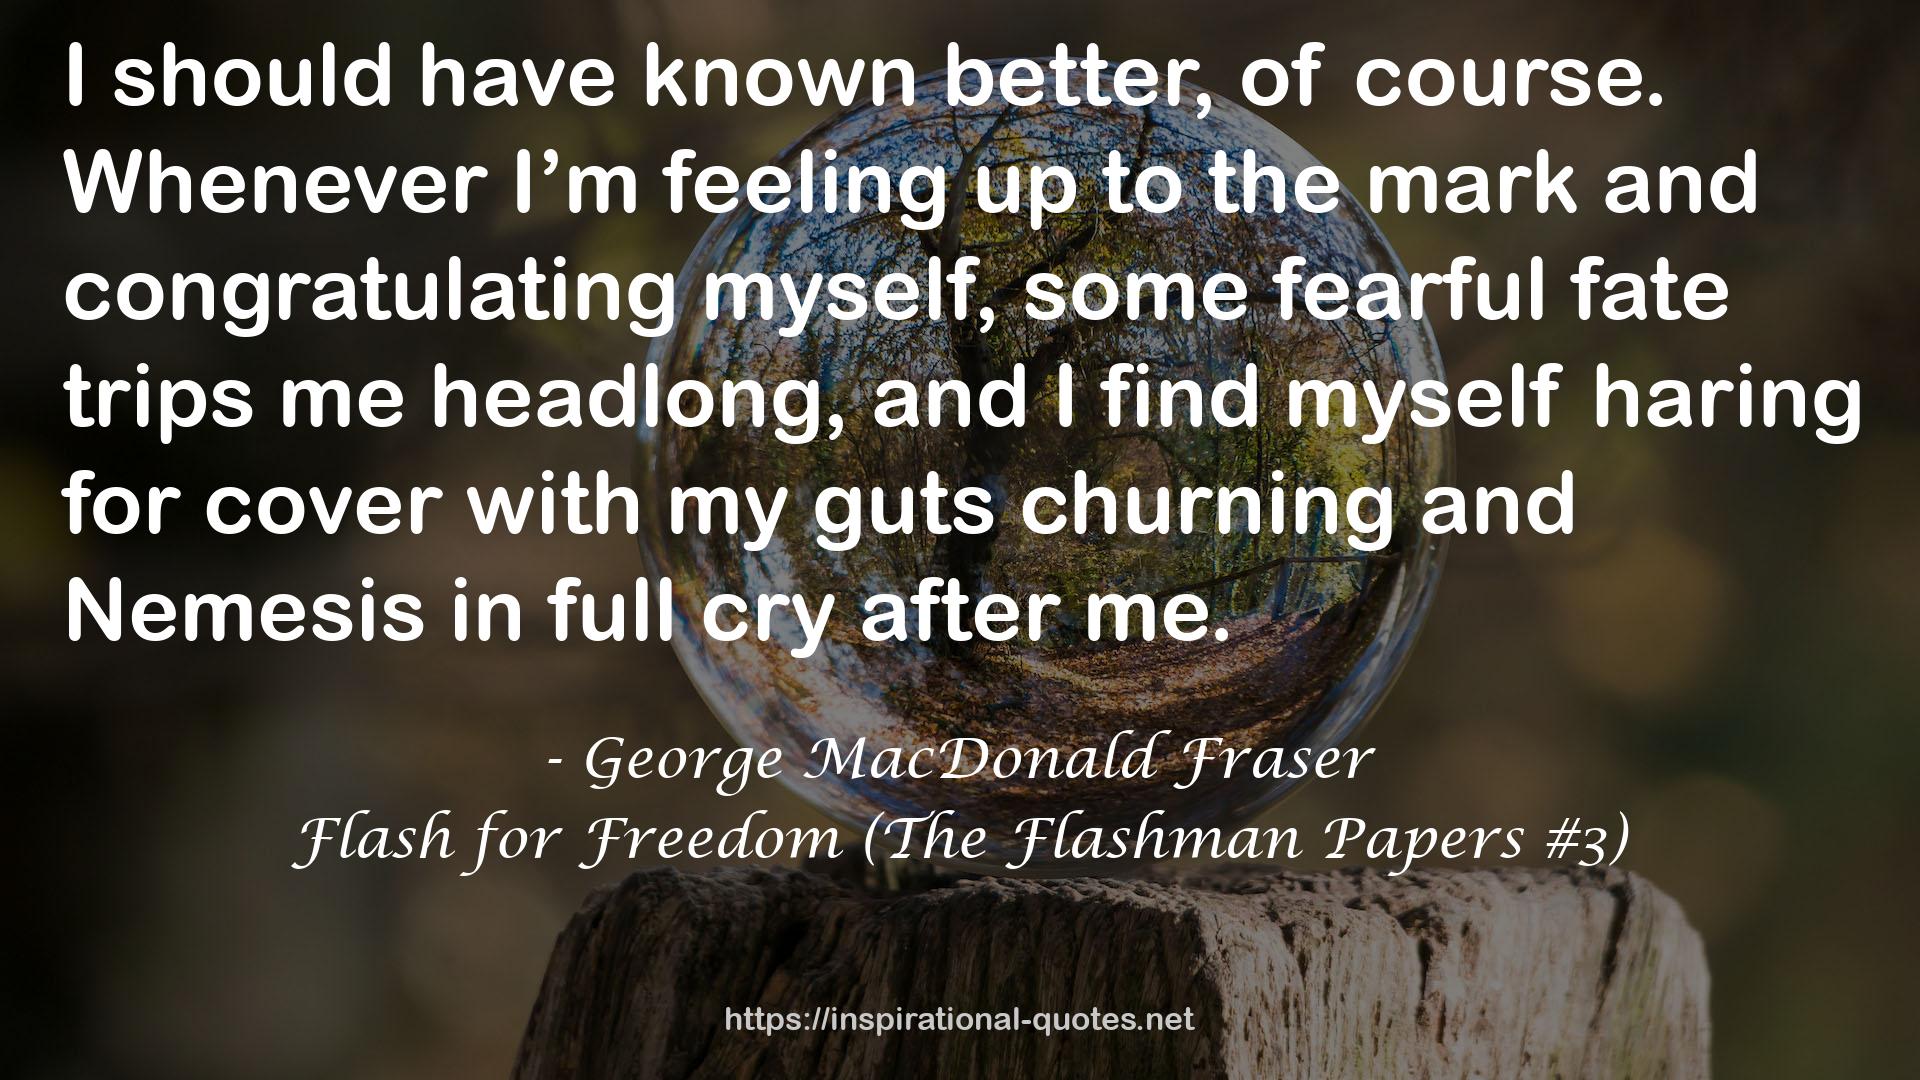 Flash for Freedom (The Flashman Papers #3) QUOTES